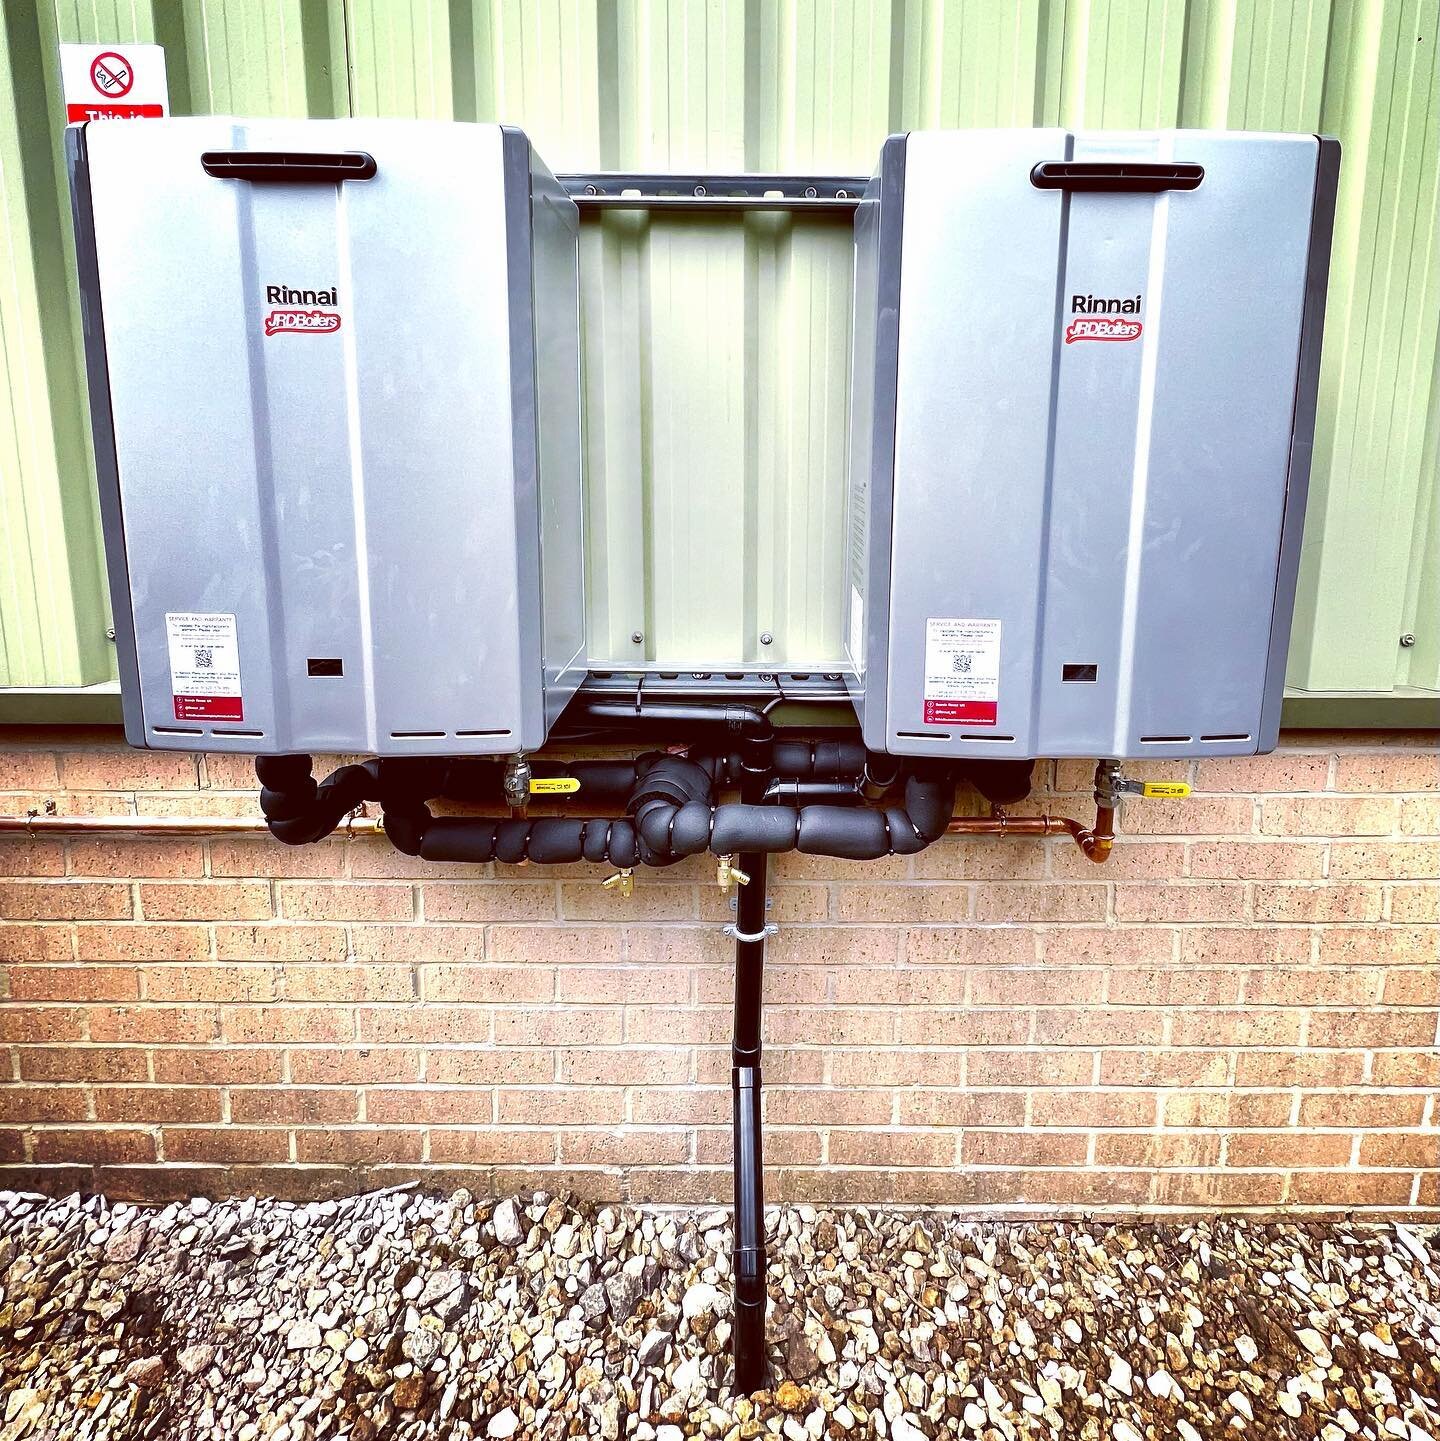 Having fun installing these beauts @Rinnai_uk Cascaded Water heaters. For a local company #cotswolds #commercialcateringequipment #commercialgas